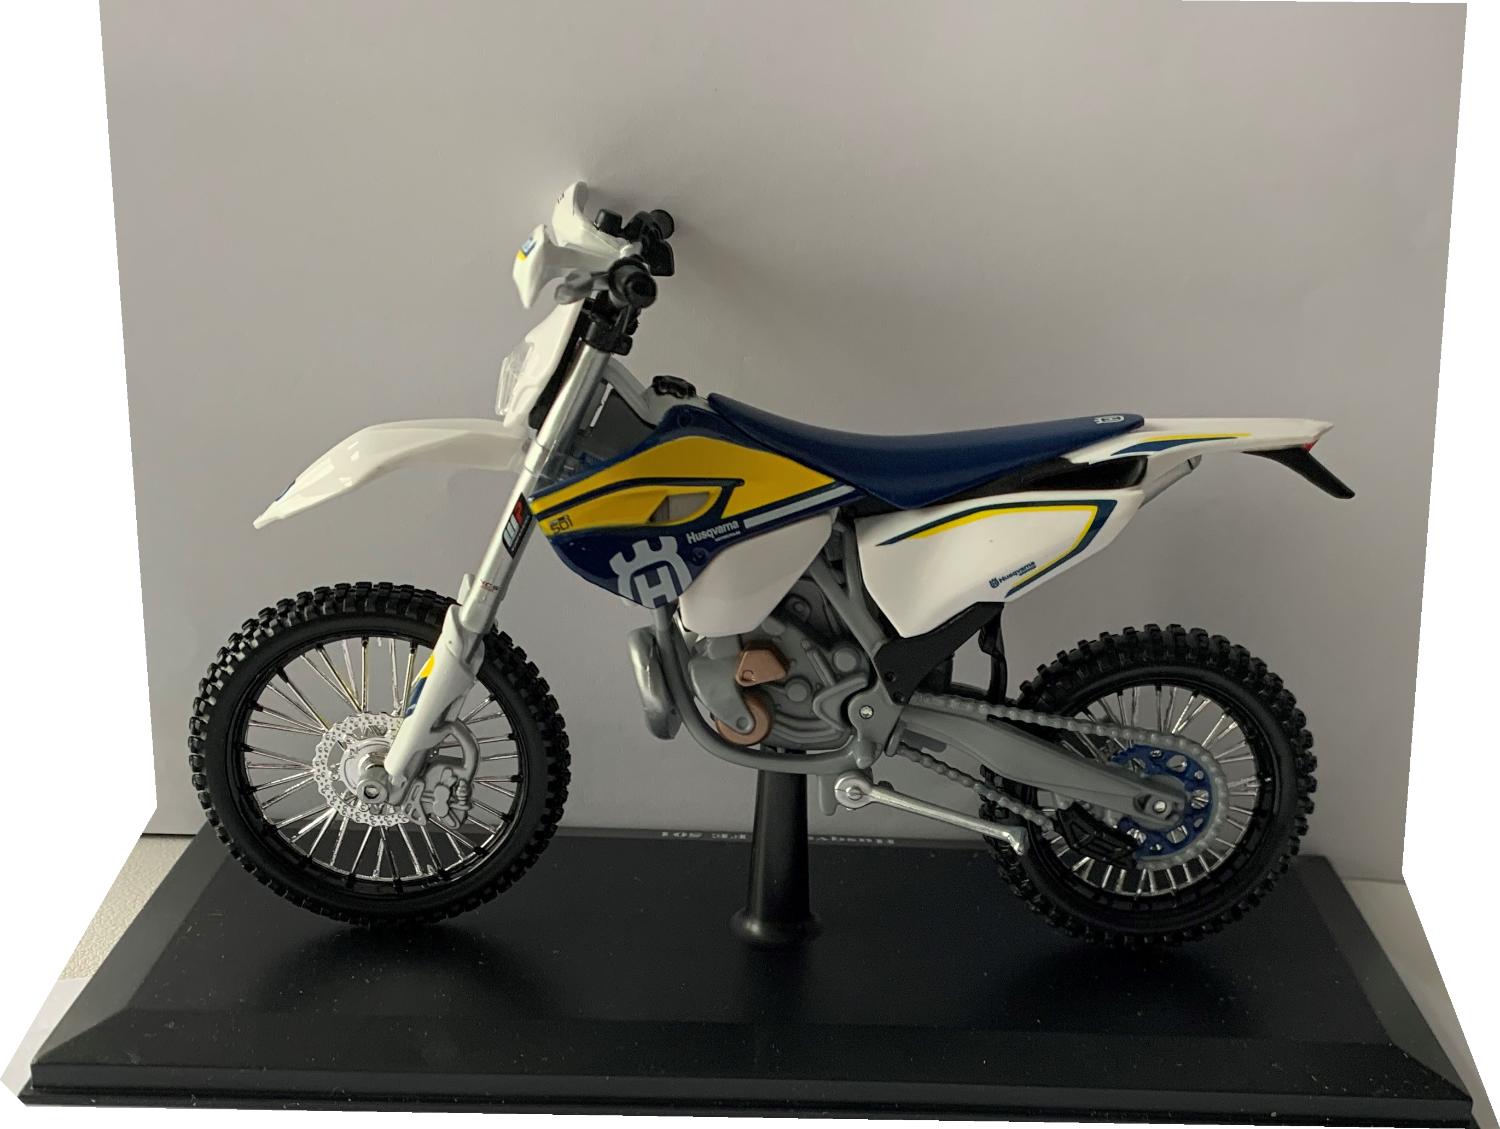 Husqvarna FE 501 in white / blue / yellow 1:12 scale model from Maisto, mounted on a plinth in a Husqvarna themed box